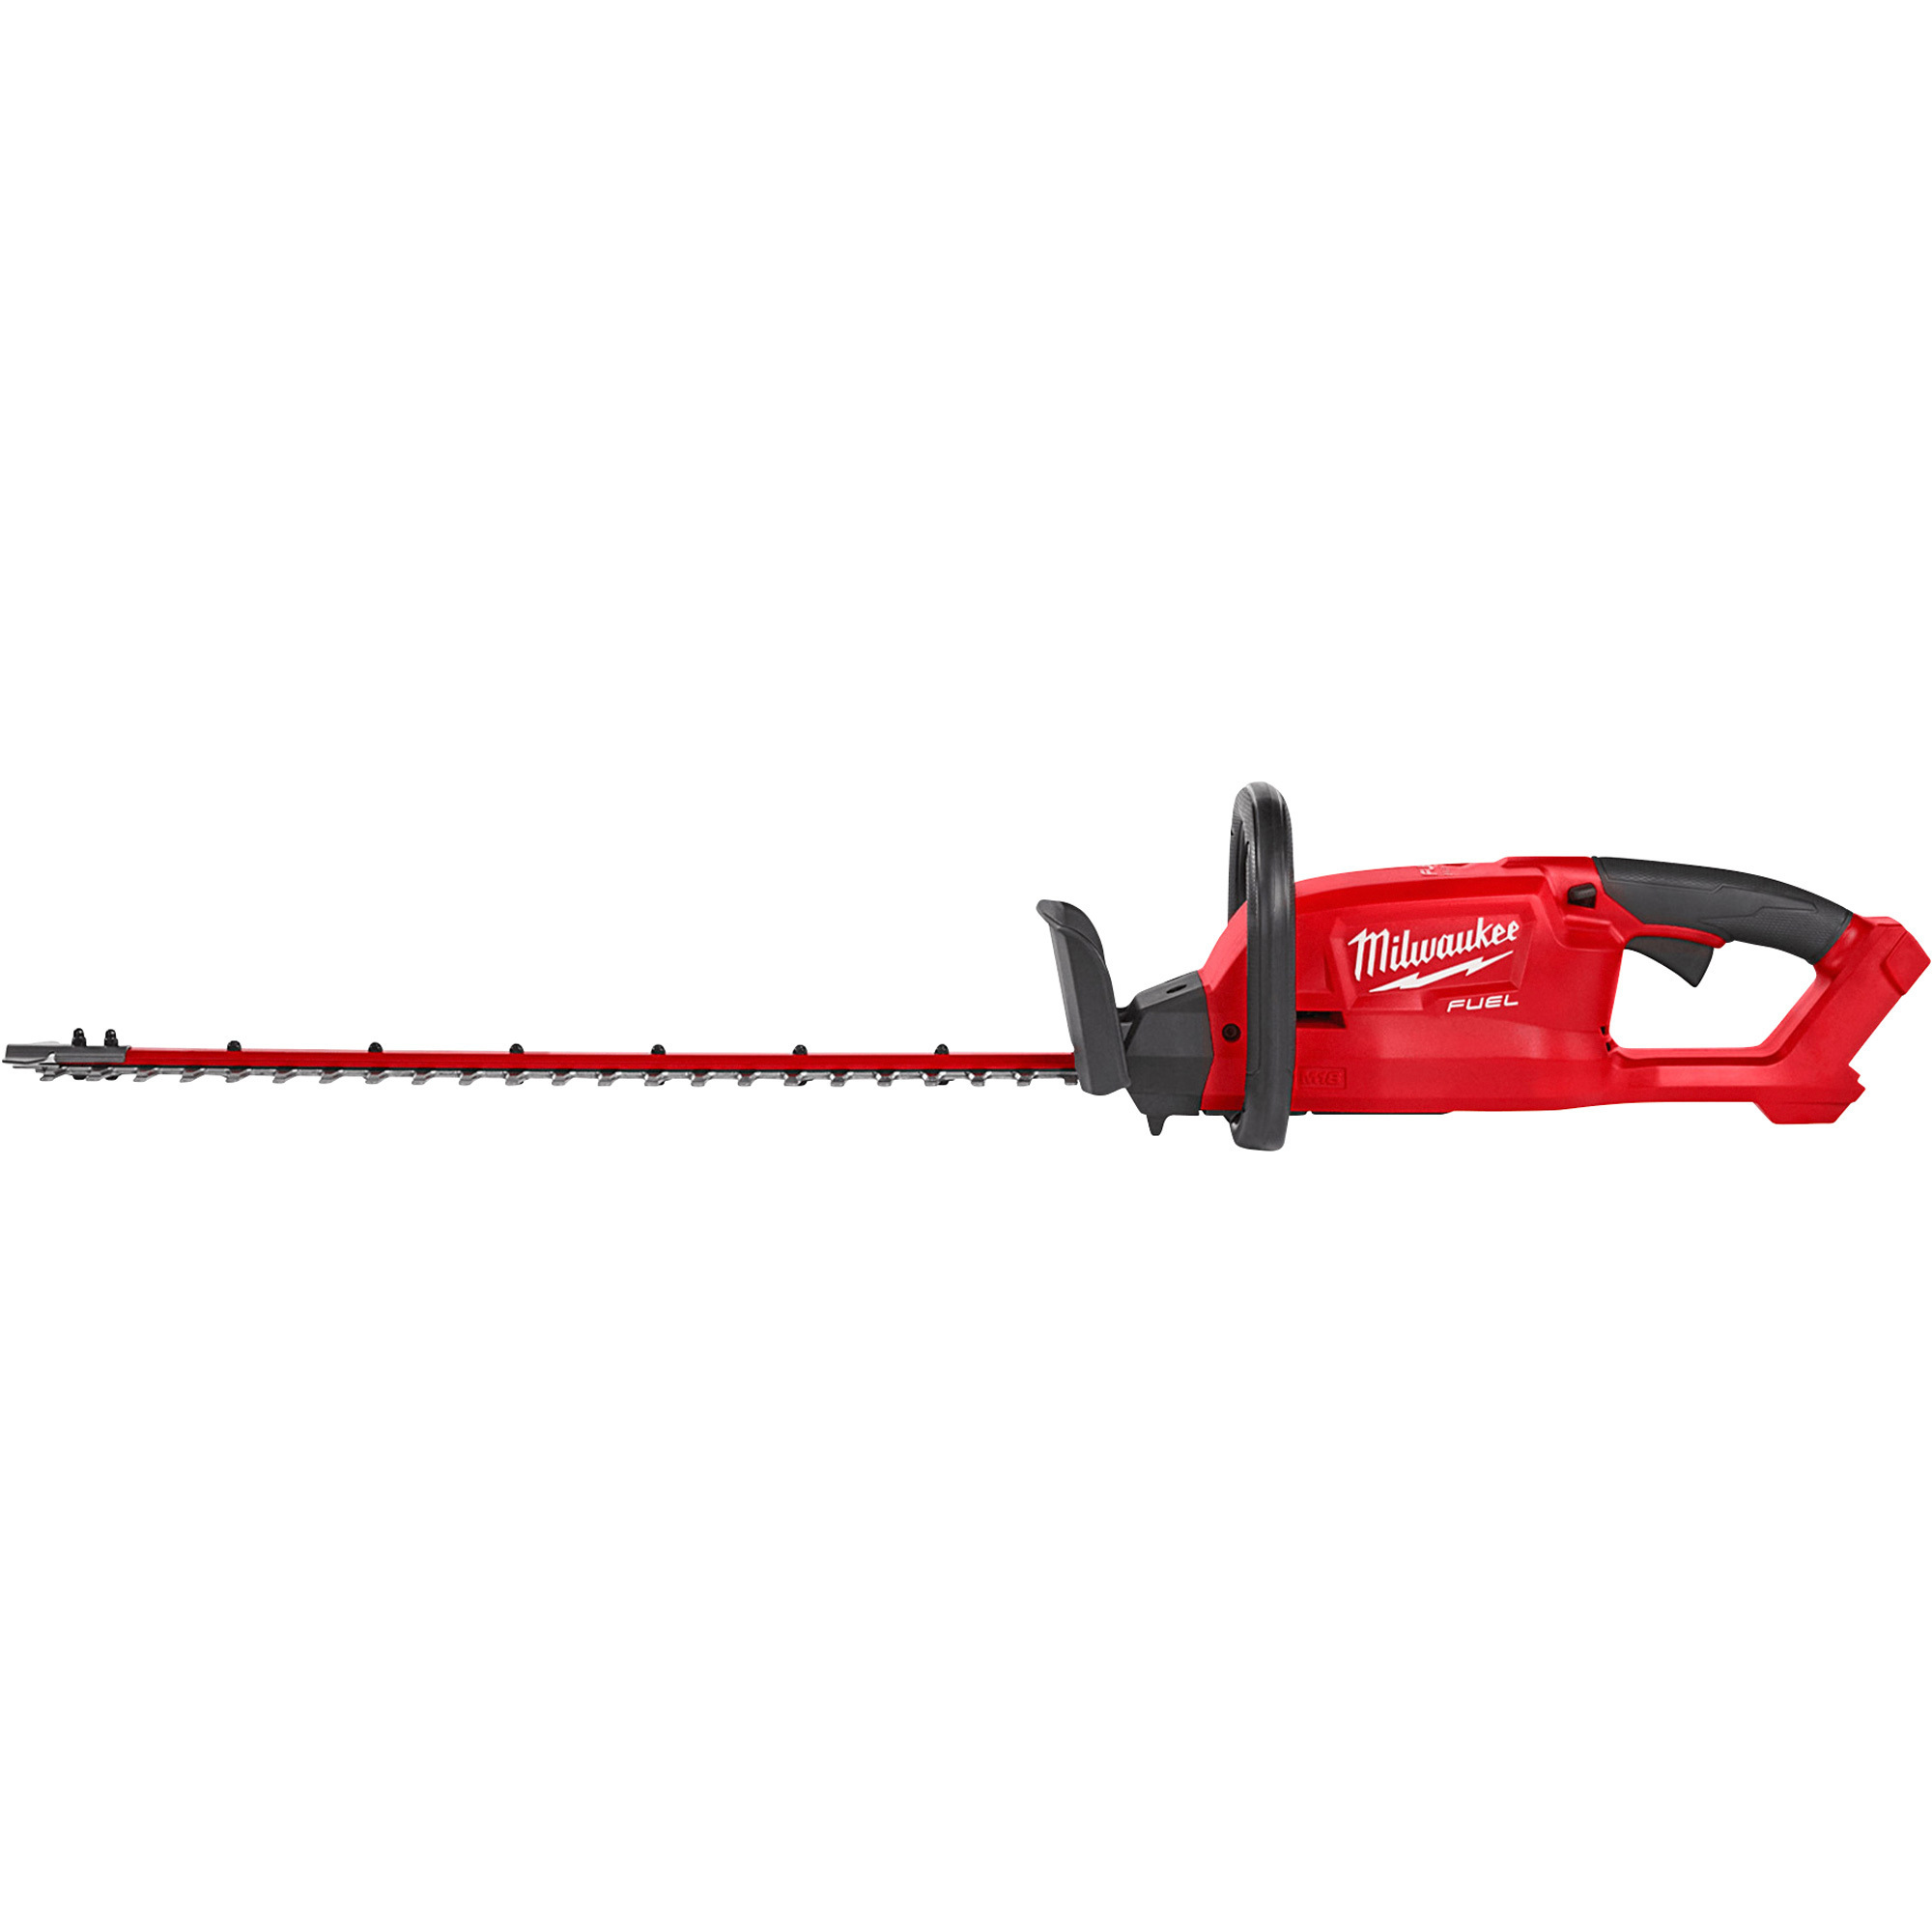 Milwaukee M18 FUEL Cordless Hedge Trimmer, 18V Lithium-Ion, Tool Only, Model 2726-20